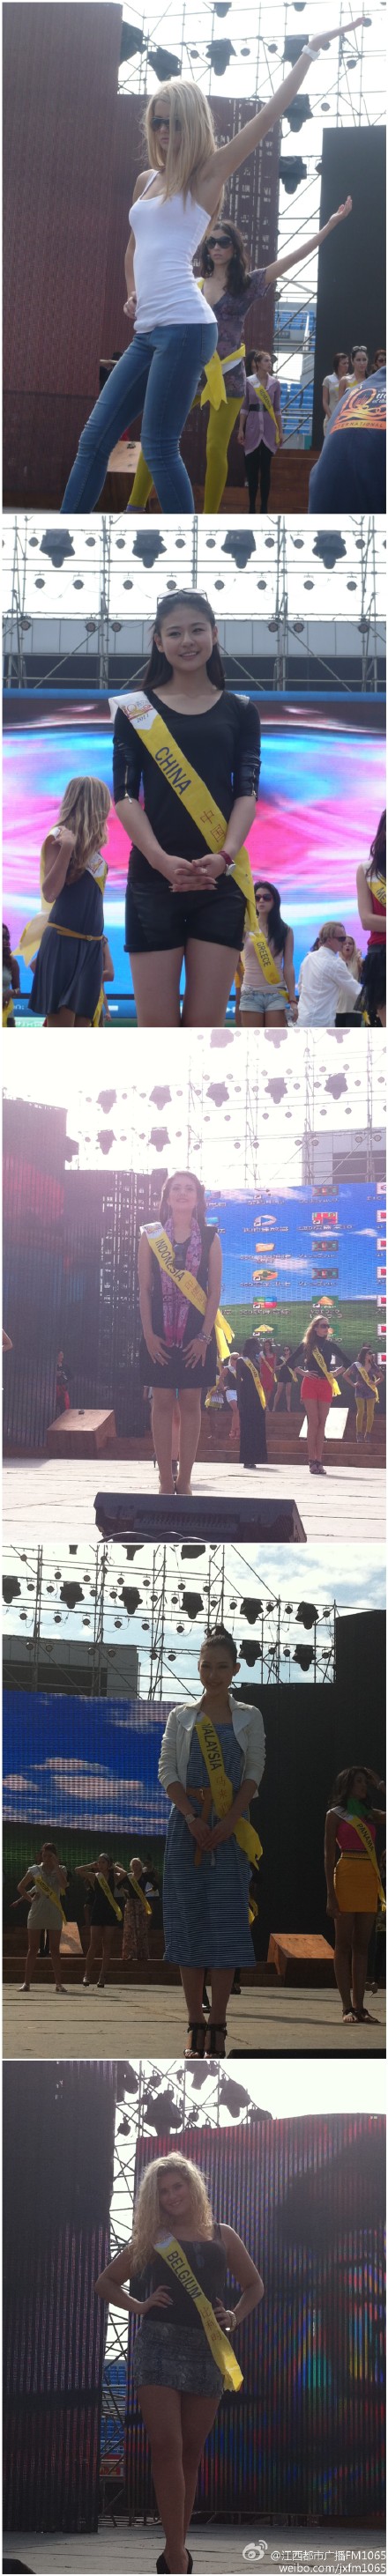 Miss Tourism Queen of the Year International 2011-India won! - Page 2 7996af1djw1dmr0hgvrxkj